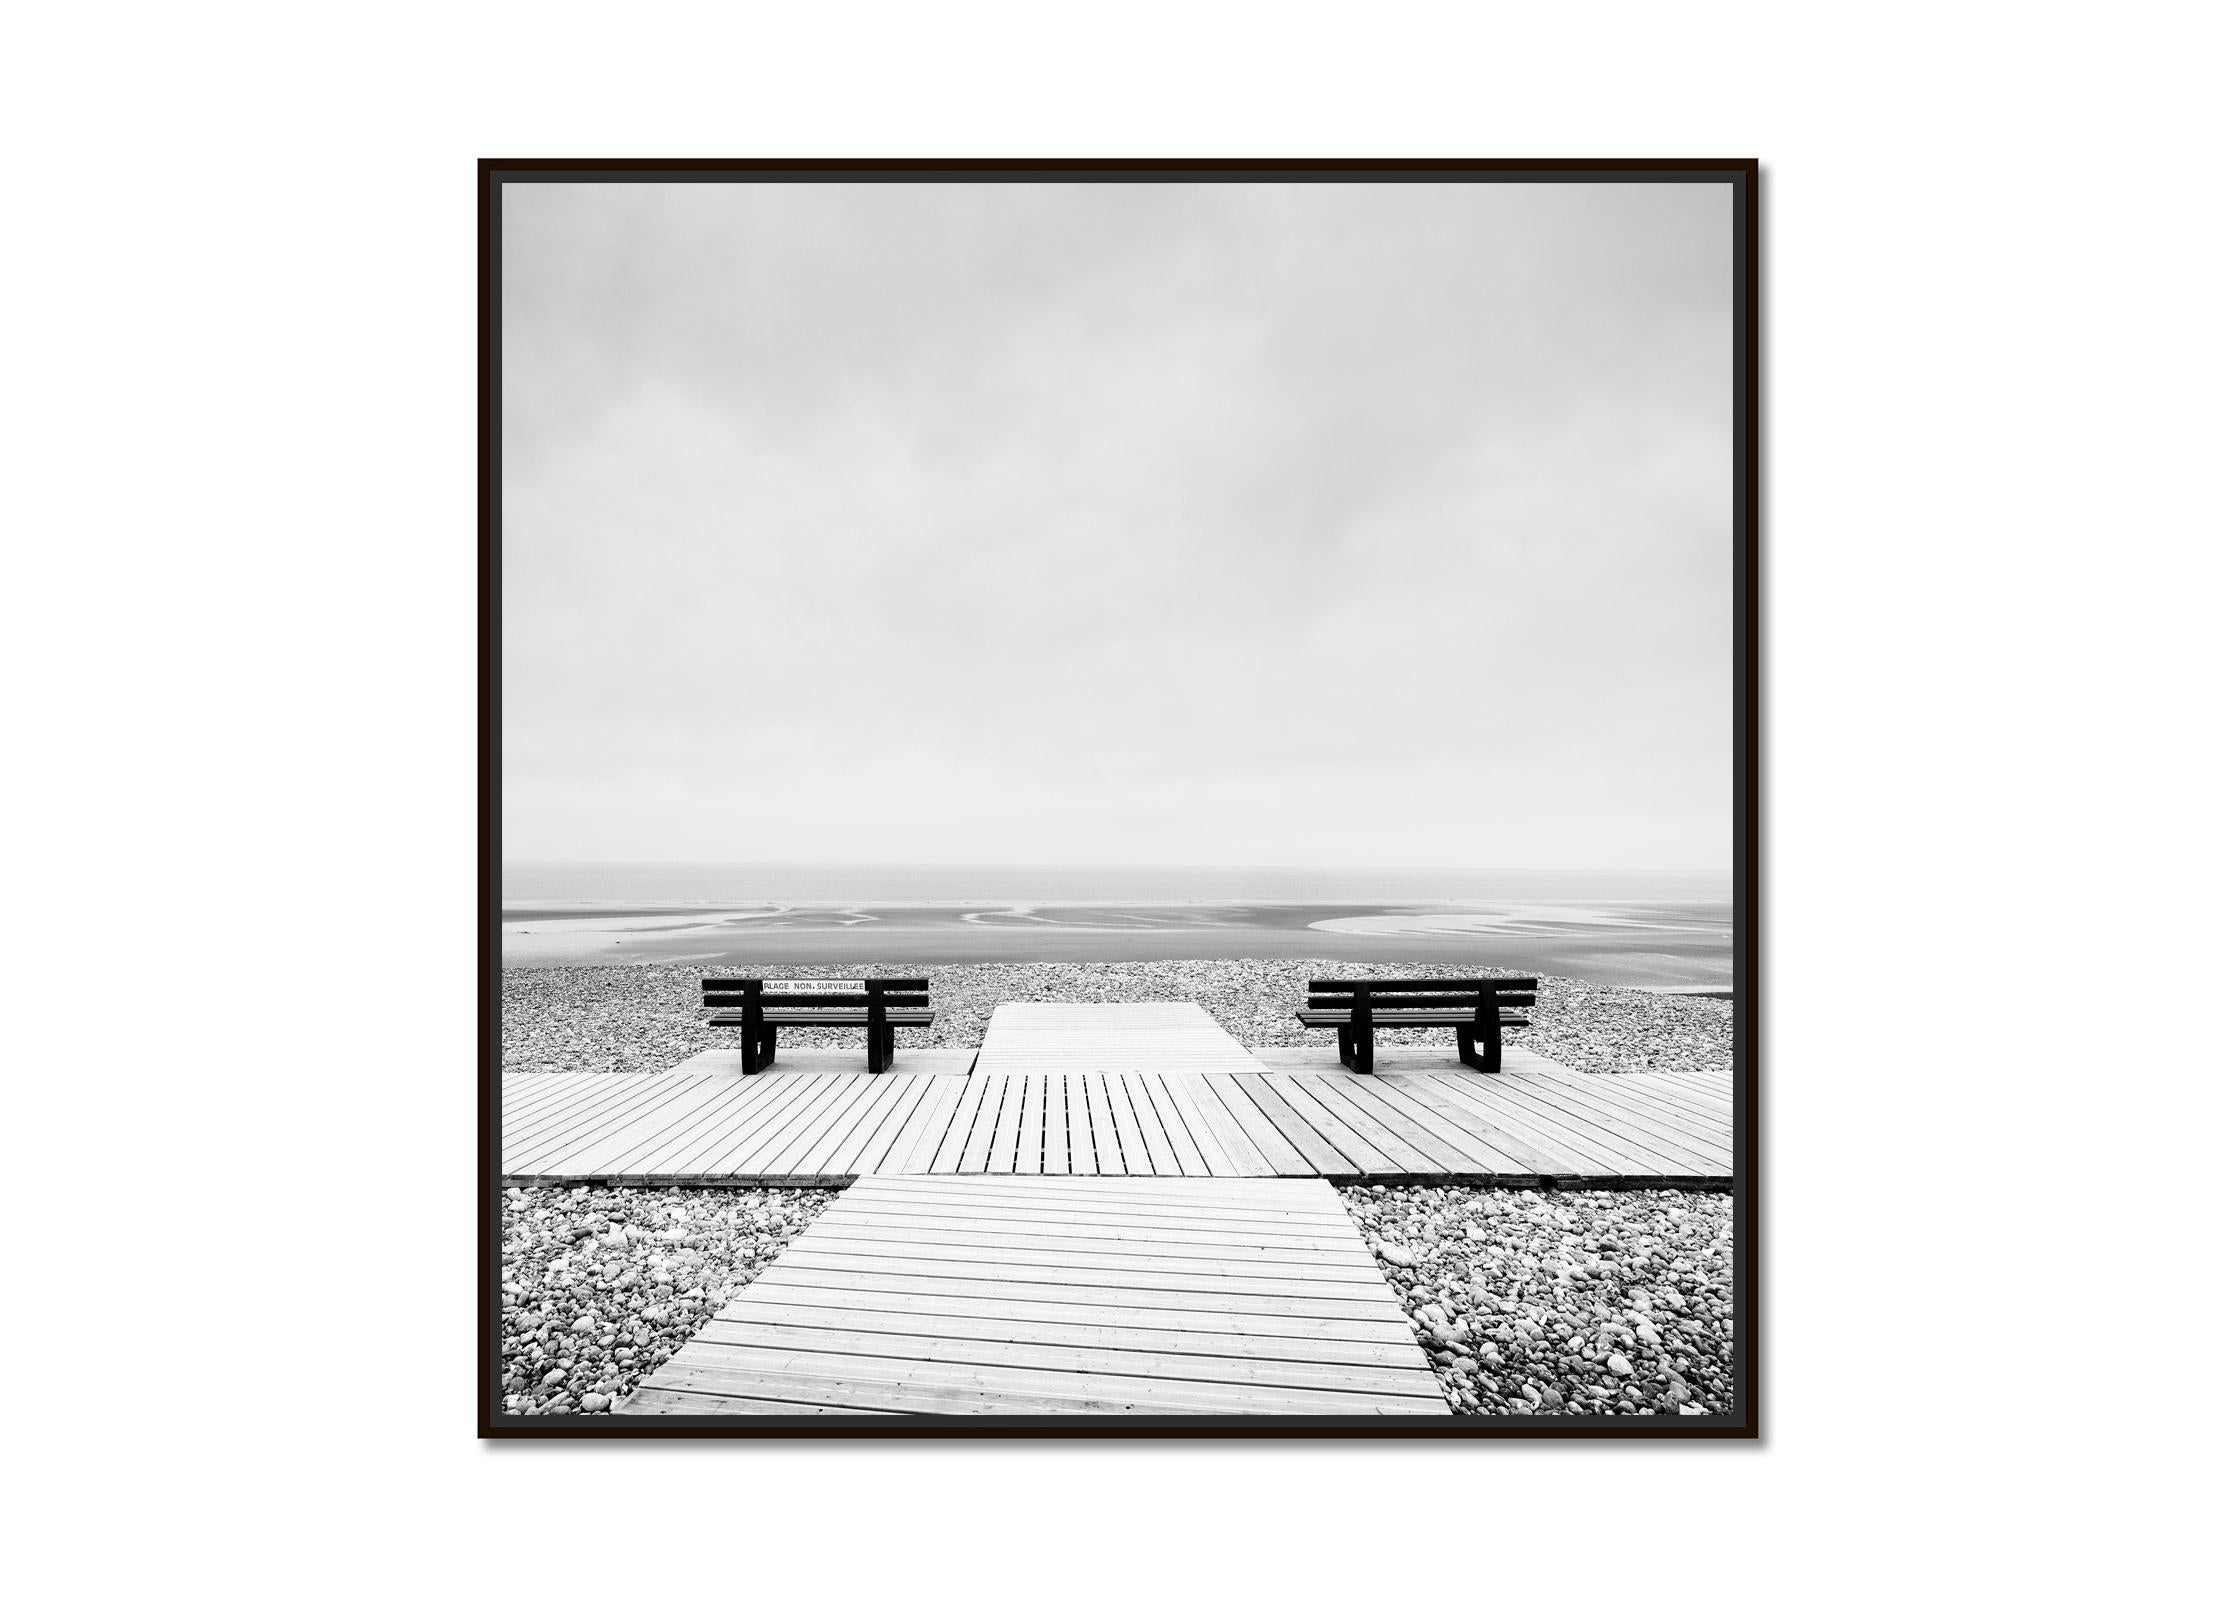 Place to Linger, benches, deserted beach, black white fine art landscape print - Print by Gerald Berghammer